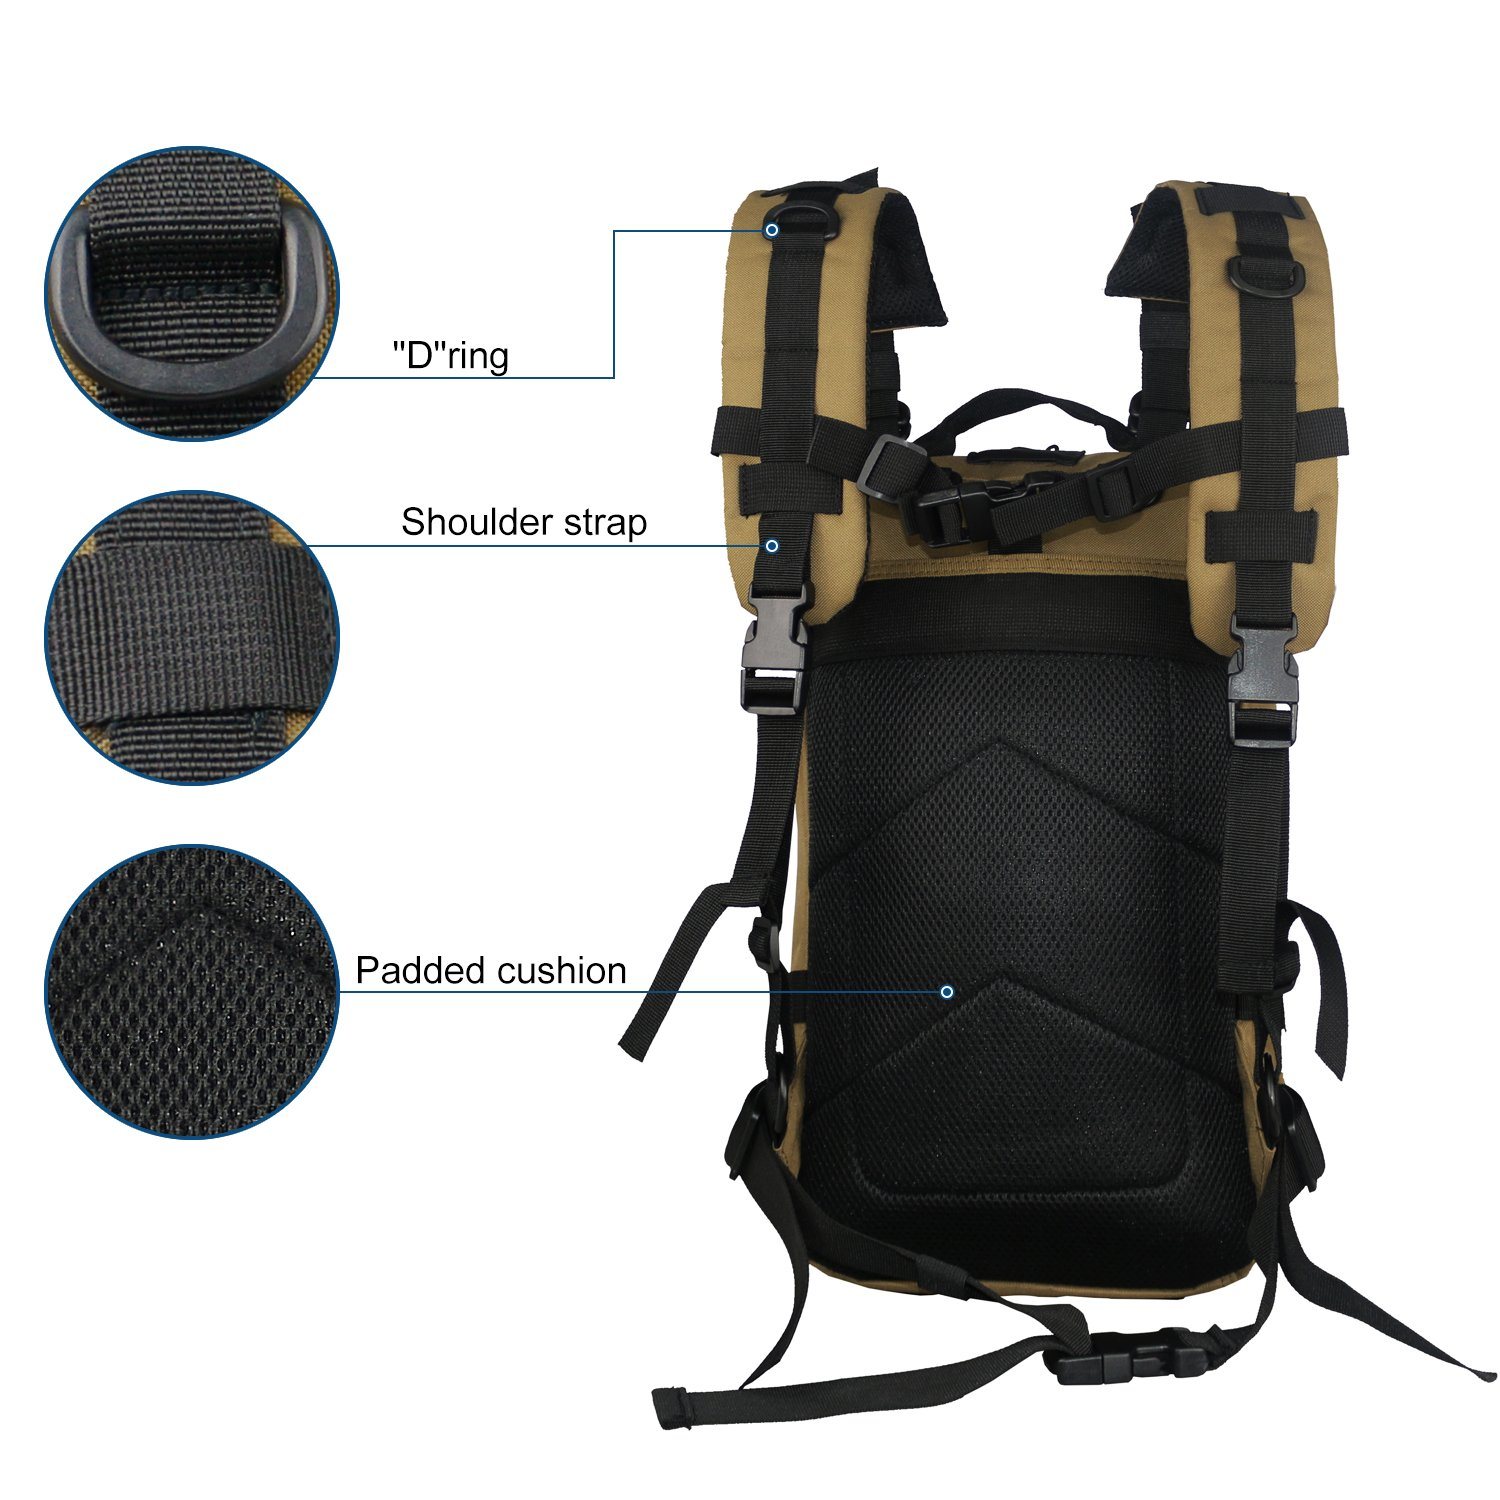 Small Army Tactical Backpack Waterproof Large Capacity Camping Traveling Bags